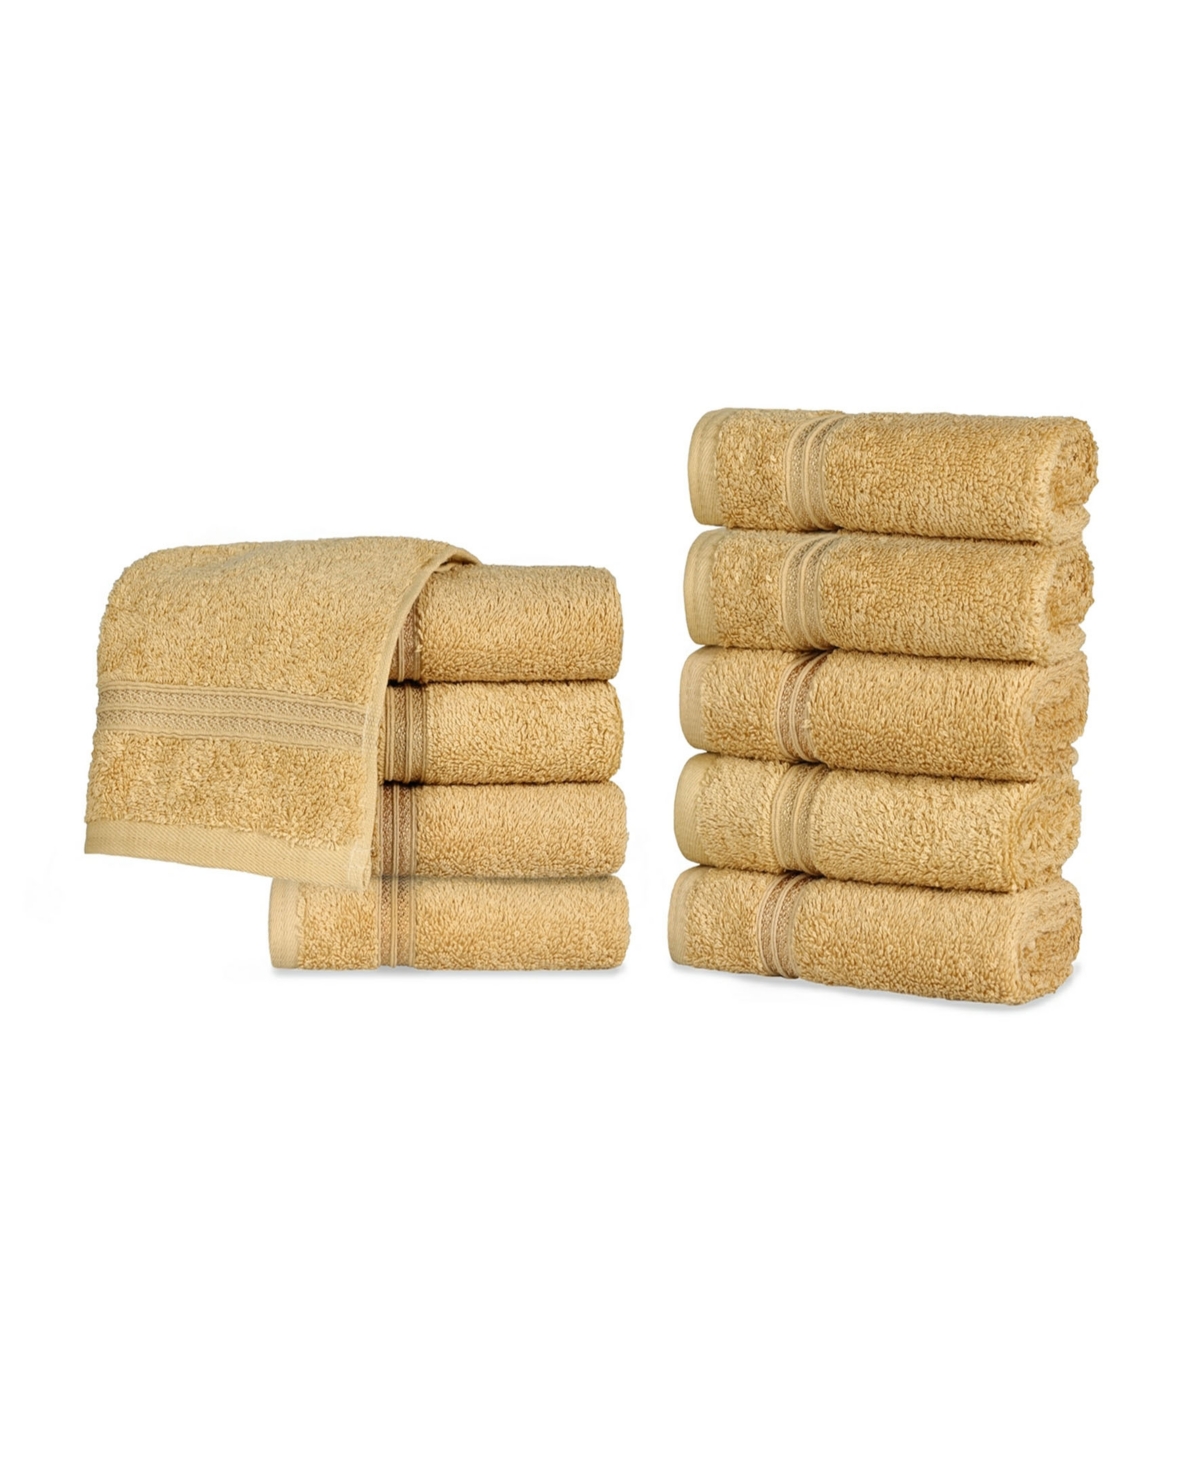 Superior Solid Quick Drying Absorbent 10 Piece Egyptian Cotton Face Towel Set Bedding In Gold